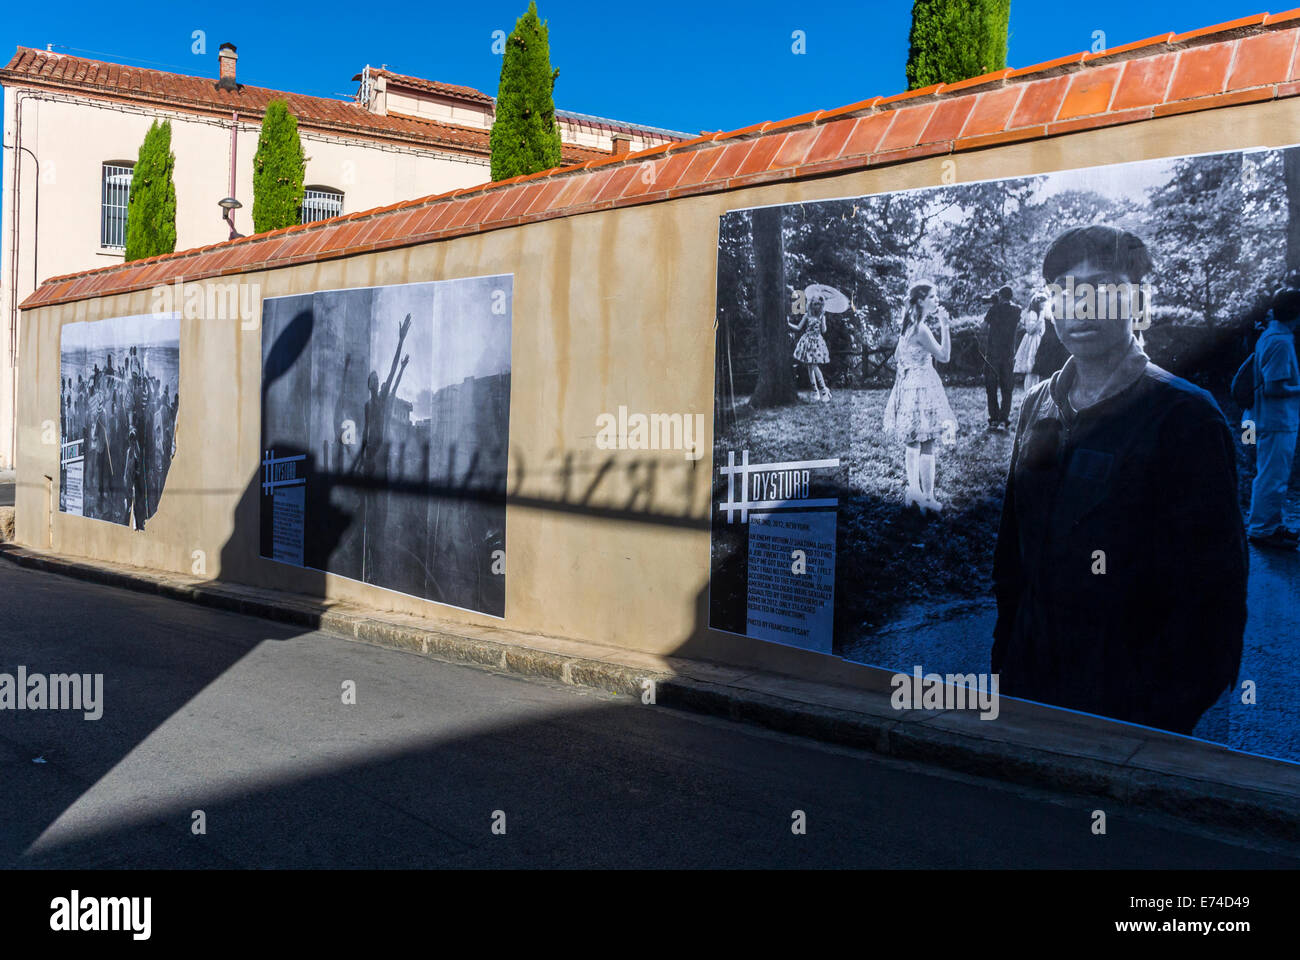 Perpignan, France, Photo Reportage, 'Visa Pour l'Image' Photojournalism Festival Photography Gallery Exhibition, Outdoor on City Walls, Street Posters, art outdoor Stock Photo